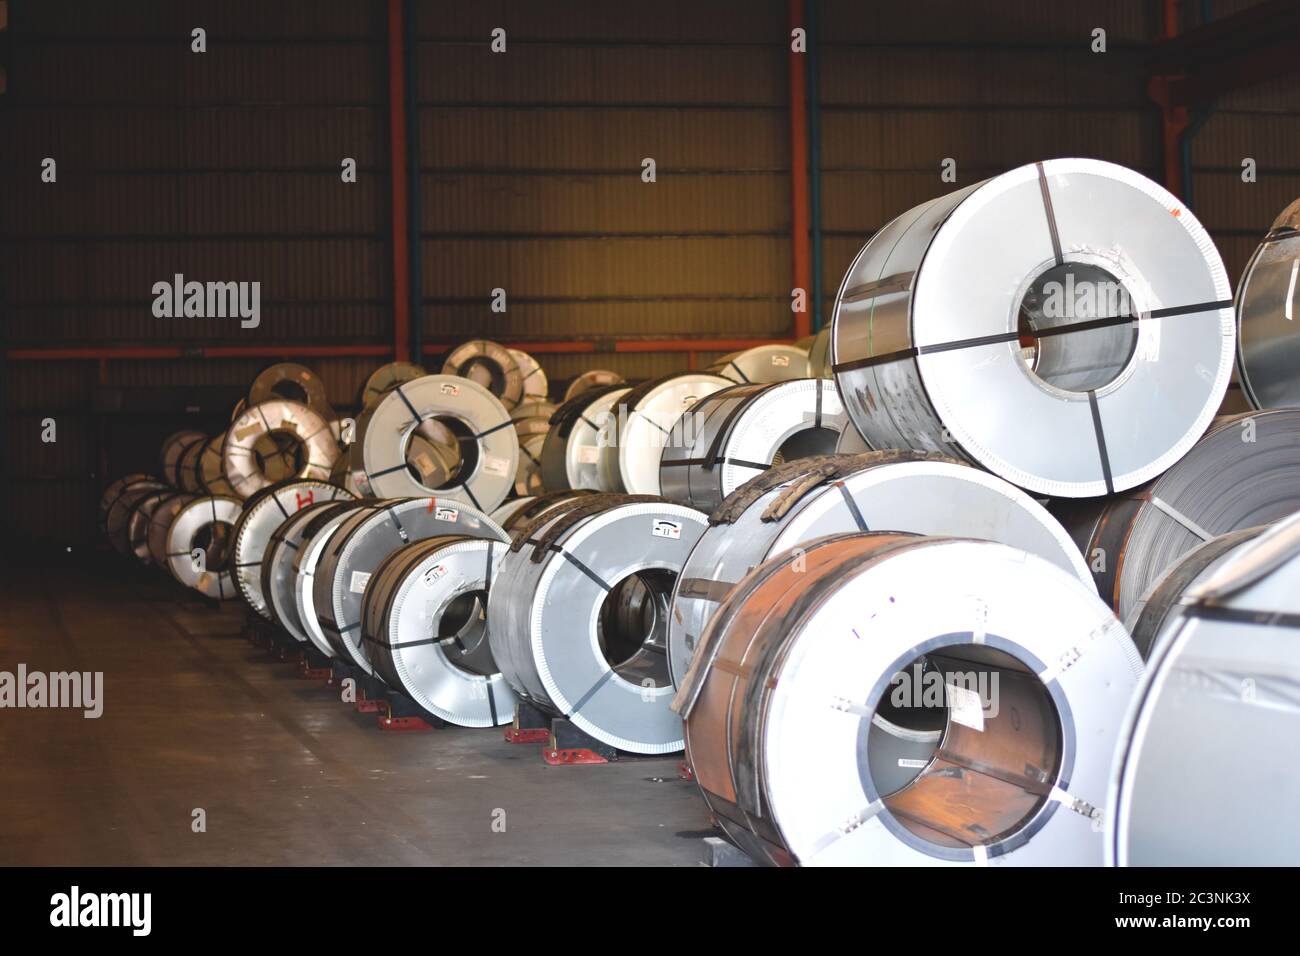 Steel coils on wooden pallets in warehouse stuffing area for container stuffing. Distribution warehouse and industrial raw material logistics. Stock Photo